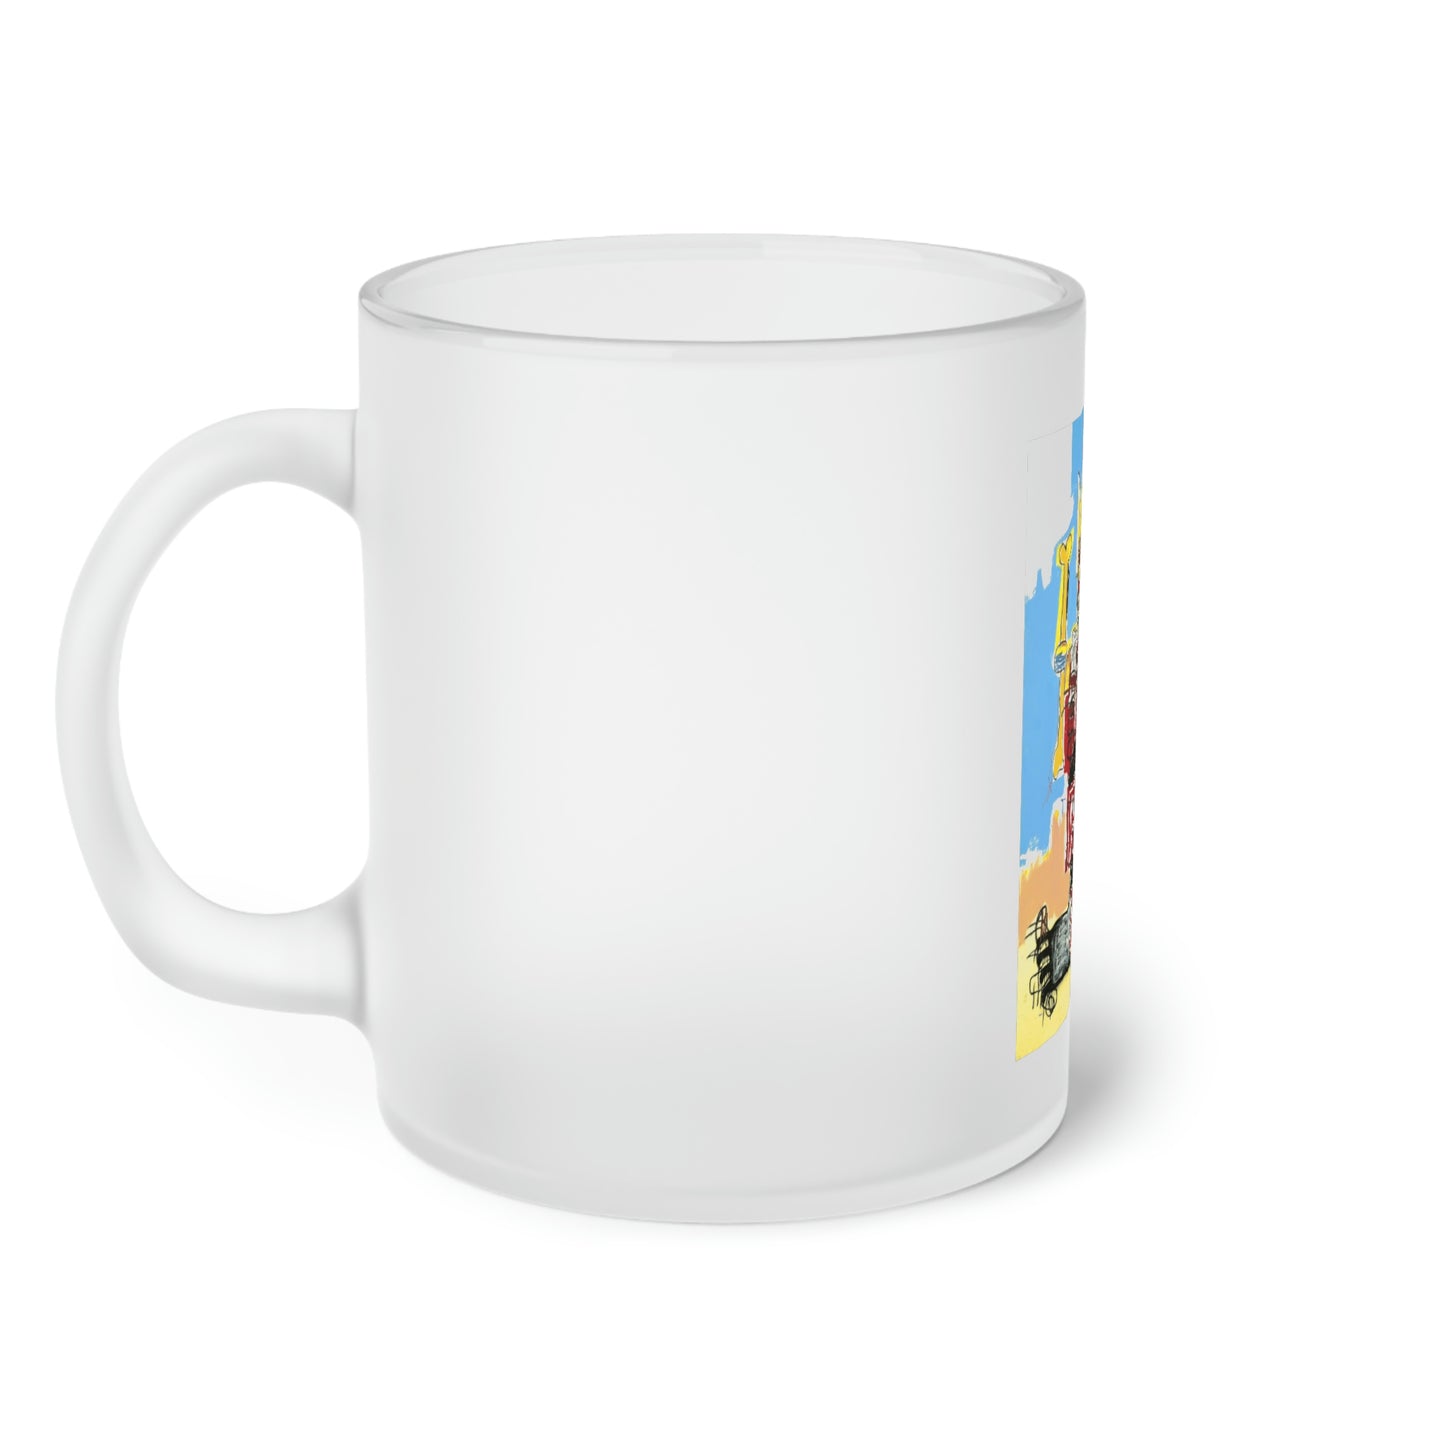 Jean-Michel Basquiat "Untitled" 1982 Frosted Glass Mug